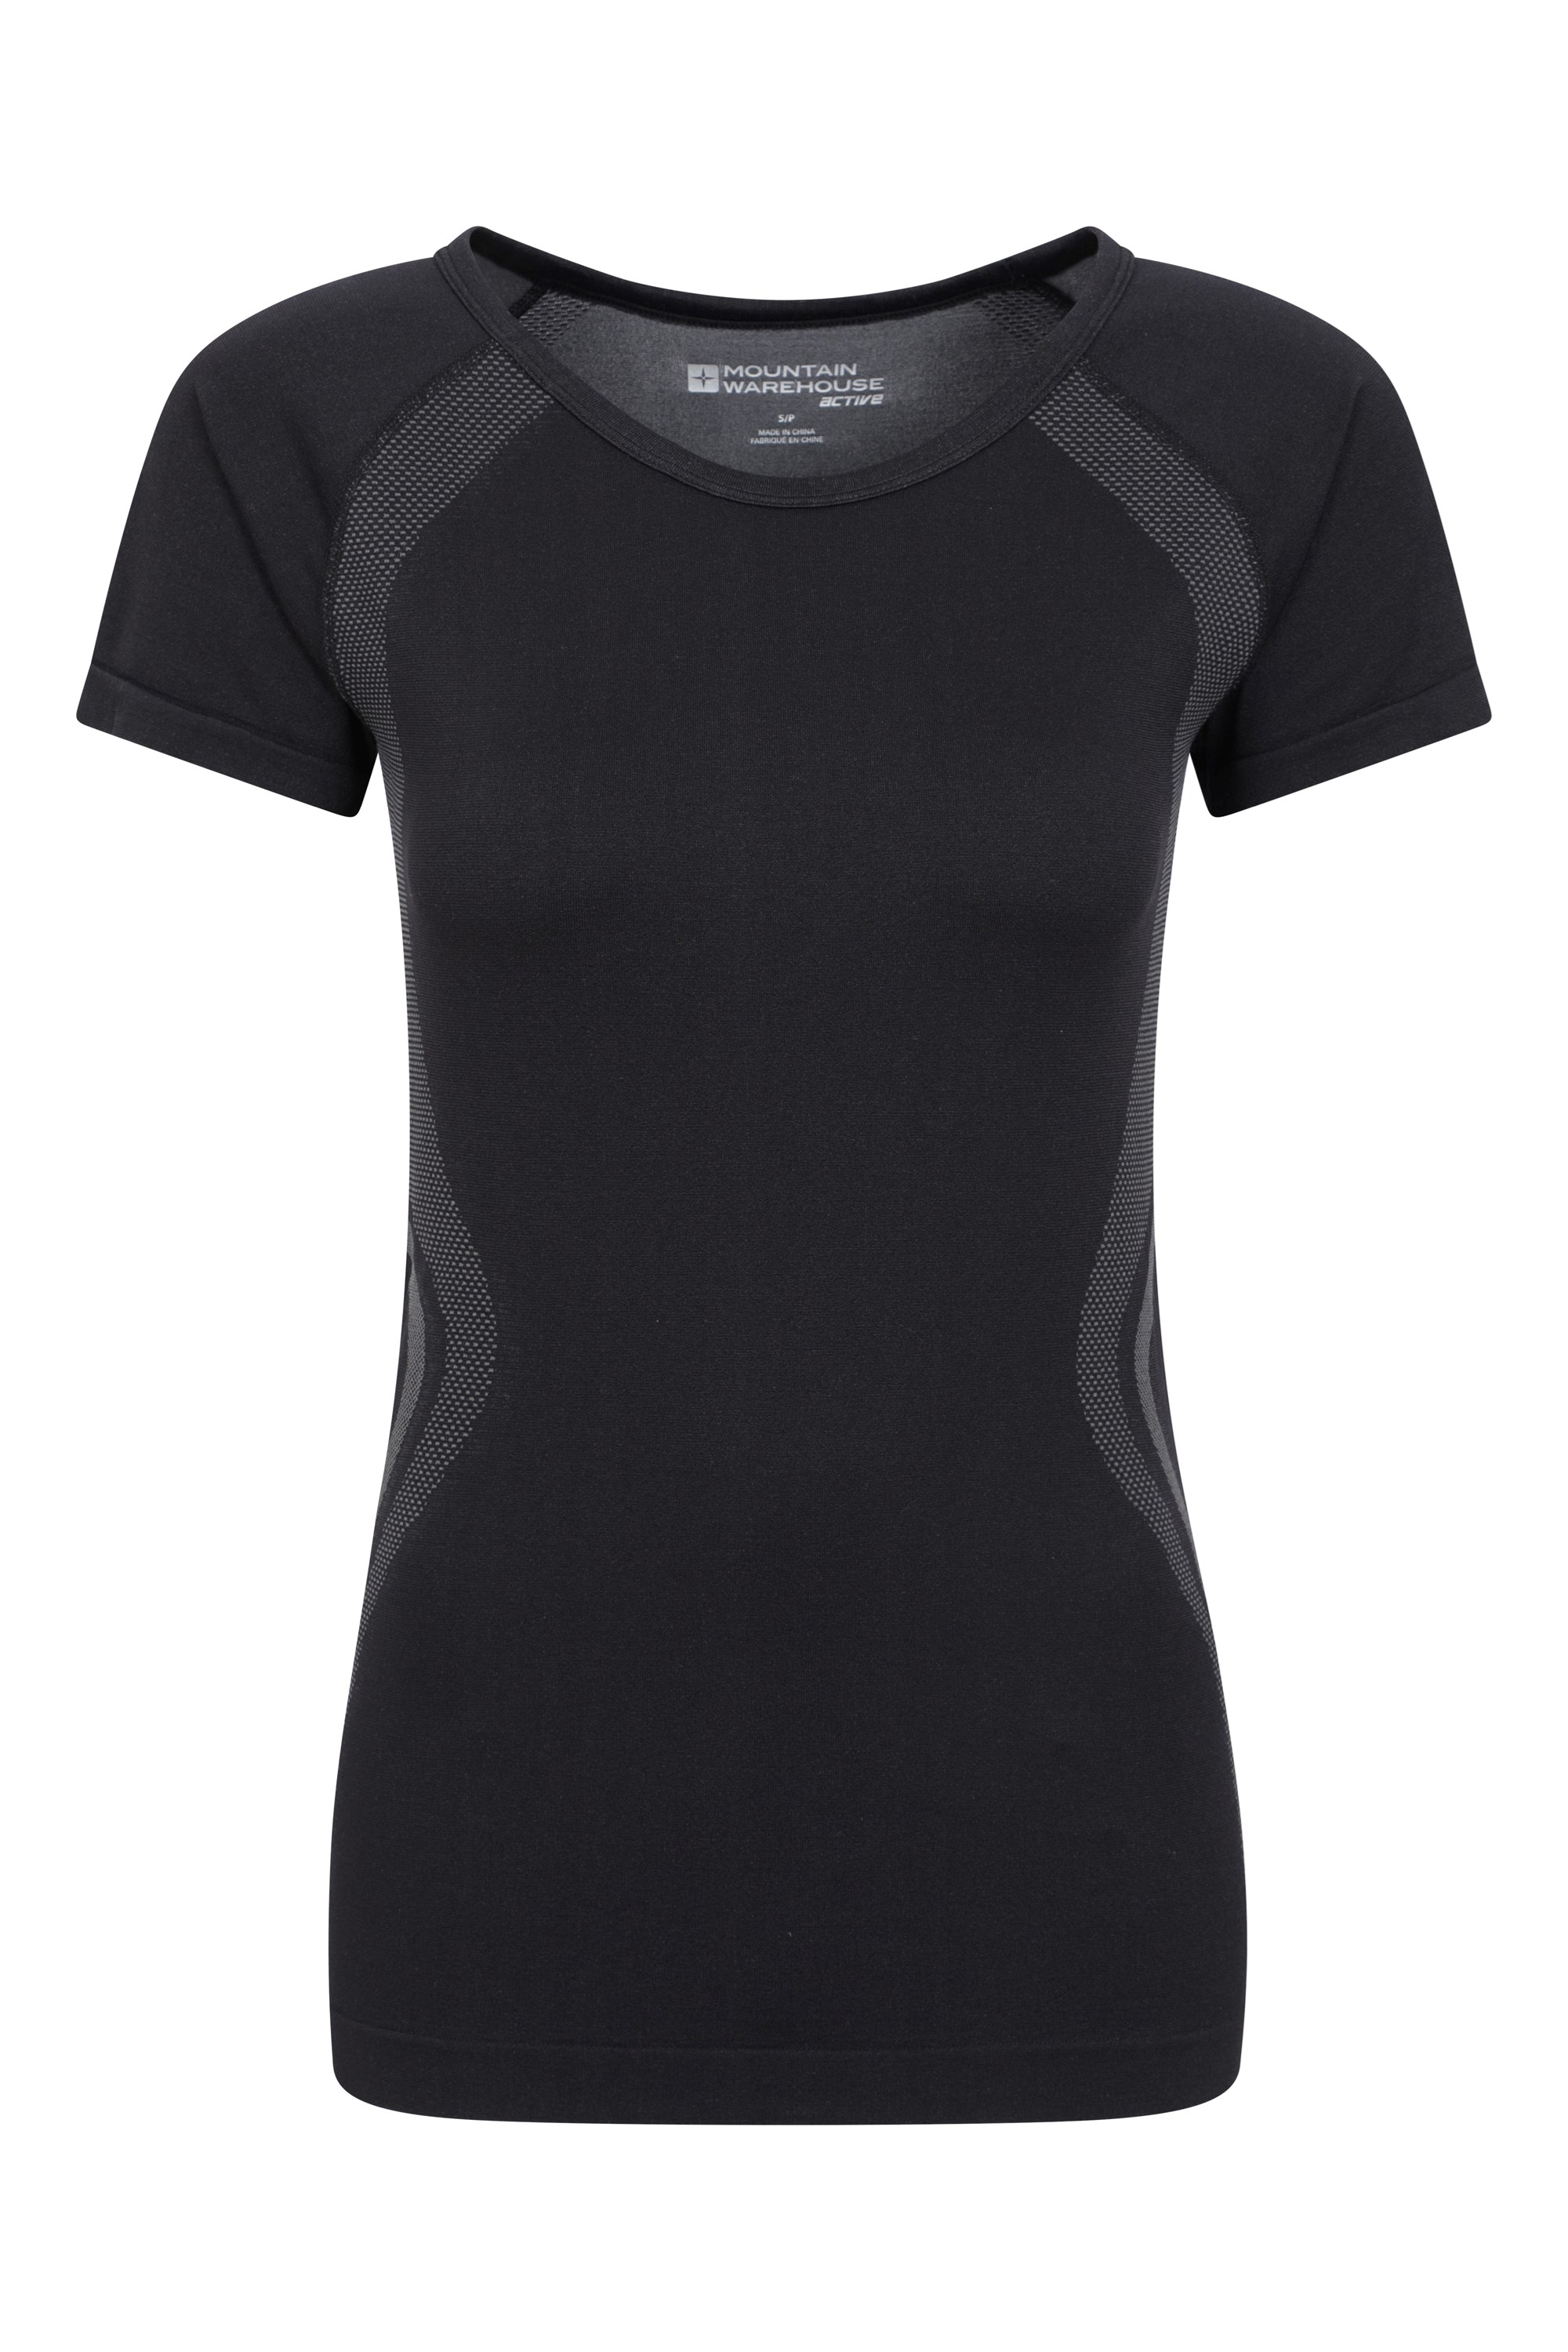 Mountain Warehouse MOUNTAIN WAREHOUSE ISOCOOL PERFORMANCE TOP BASELAYER 46" CHEST  VGC 